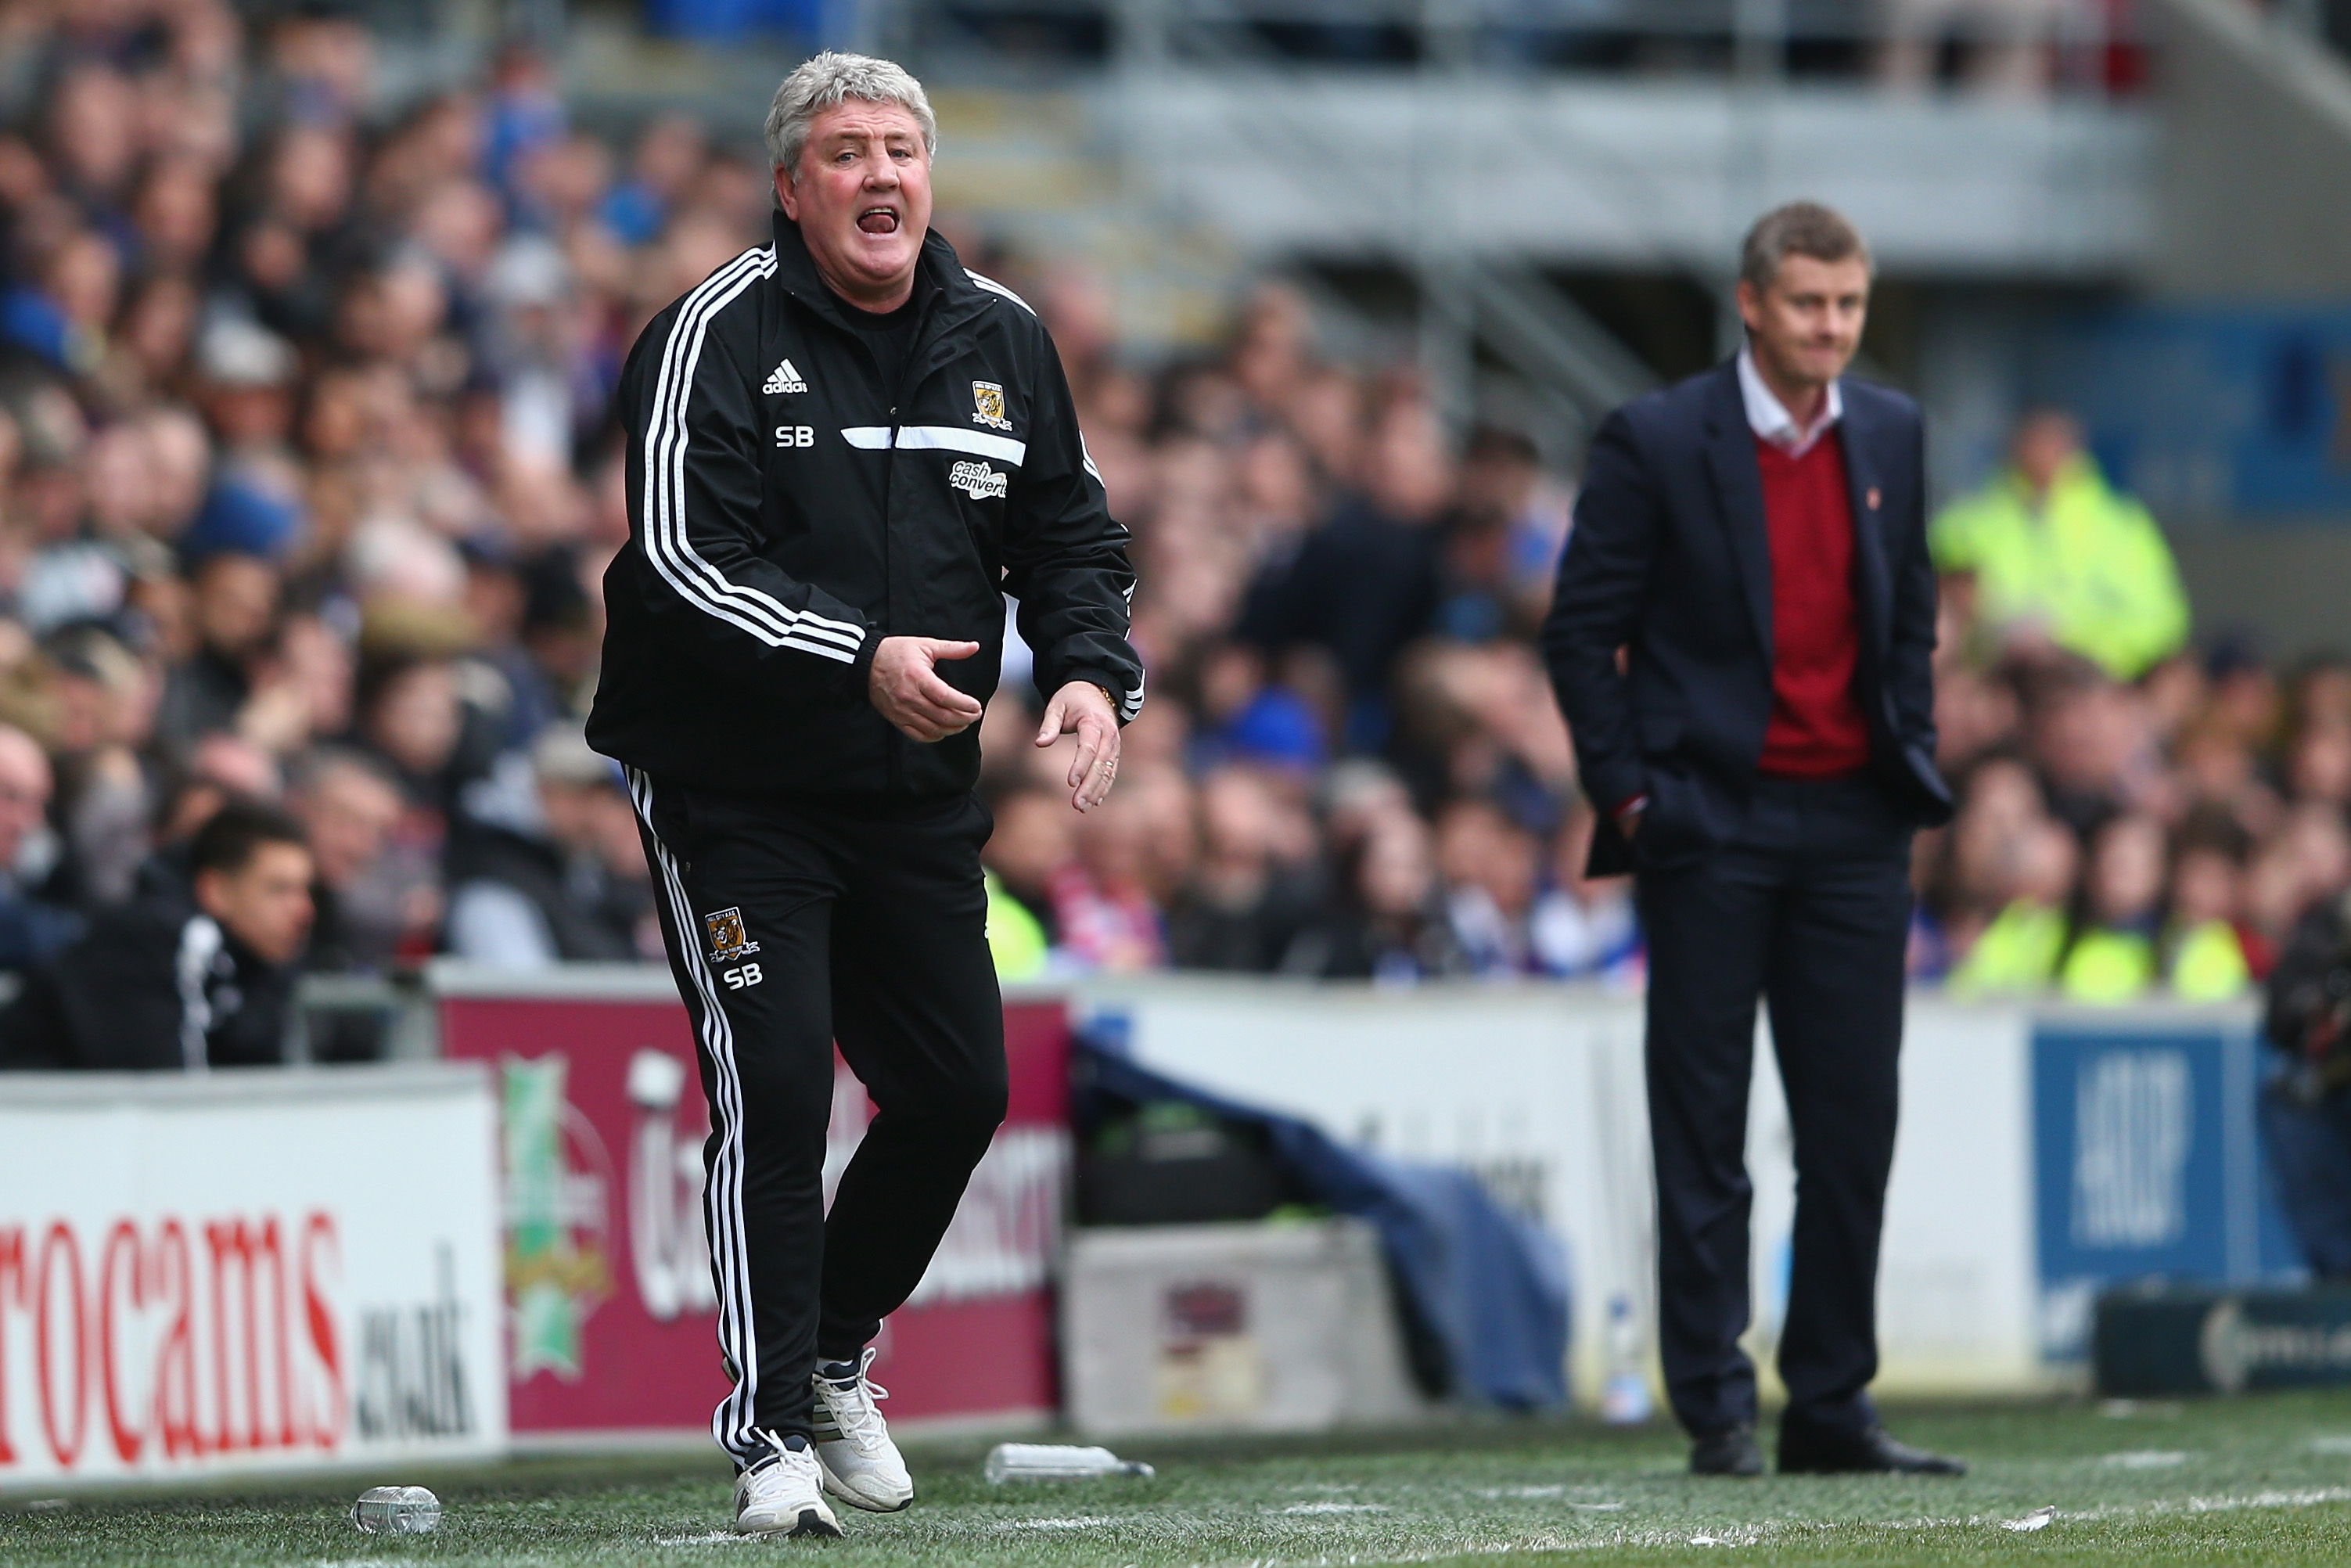 CARDIFF, WALES - FEBRUARY 22:  Steve Bruce (L) the manager of Hull City shouts instructions as Ole Gunnar Solskjaer (R) the manager of Cardiff City looks on during the Barclays Premier League match between Cardiff City and Hull City at the Cardiff City Stadium on February 22, 2014 in Cardiff, Wales.  (Photo by Michael Steele/Getty Images)